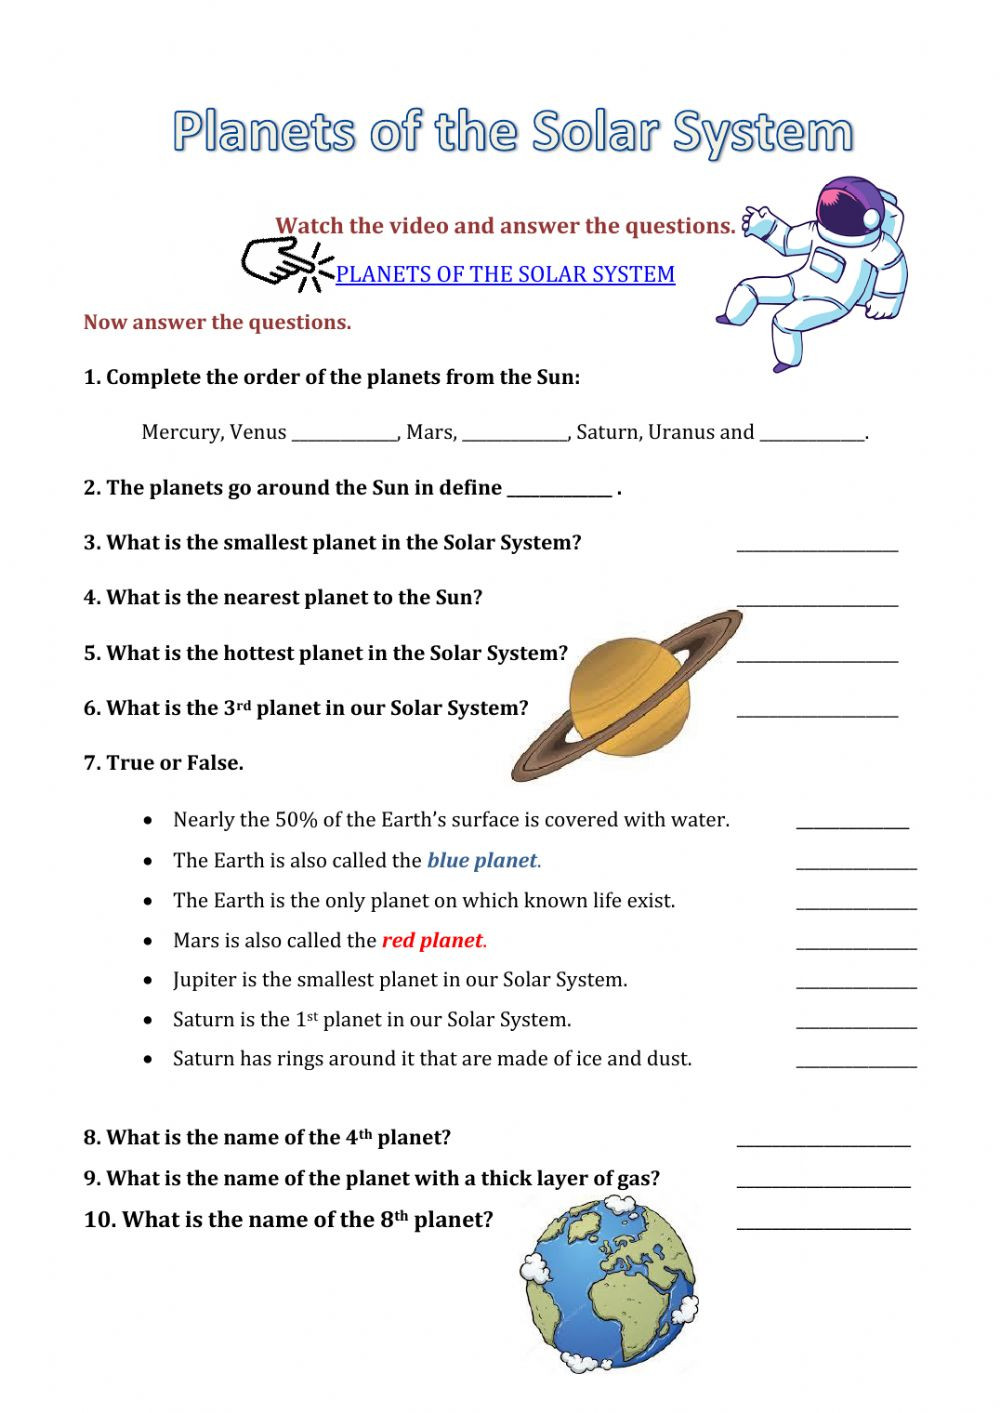 Solar System Worksheet Pdf Planets Of the solar System Interactive Worksheet